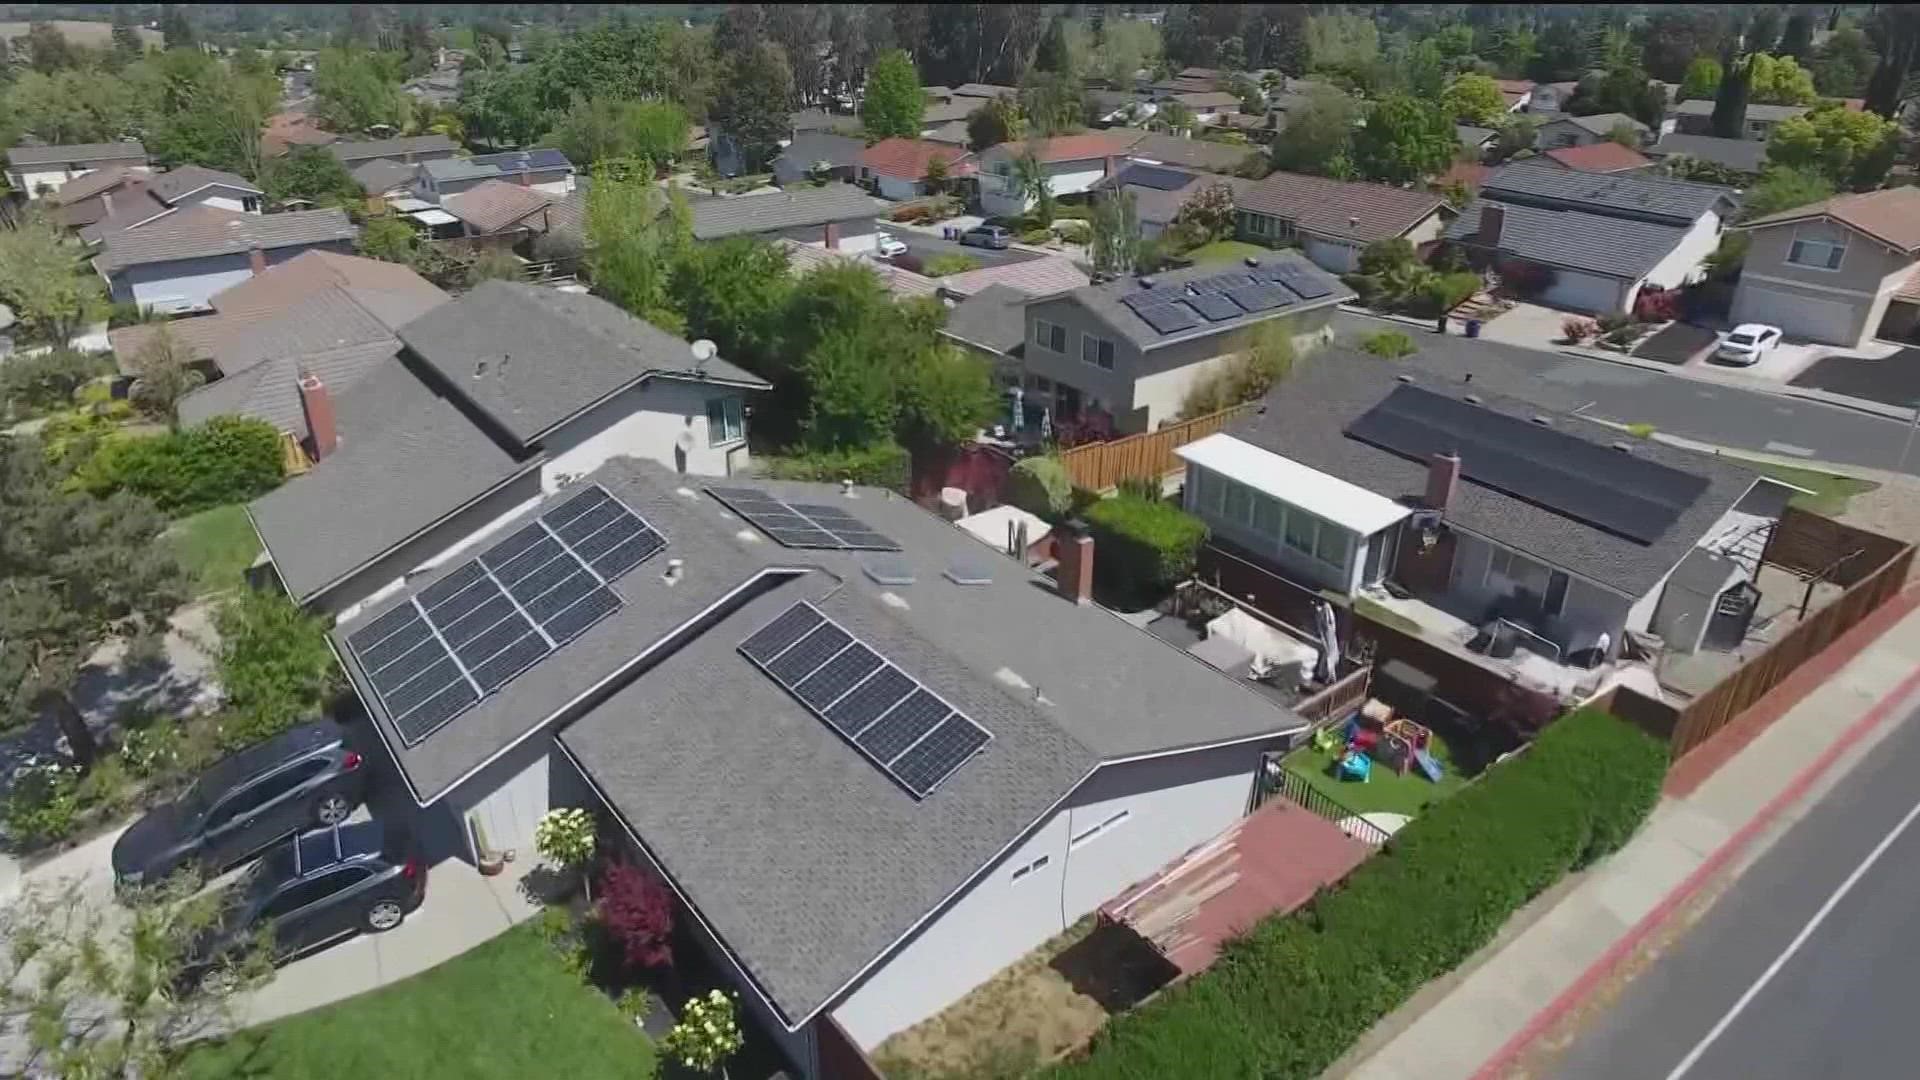 The proposal also slashes the credit customers get for their solar energy sent back to the grid.